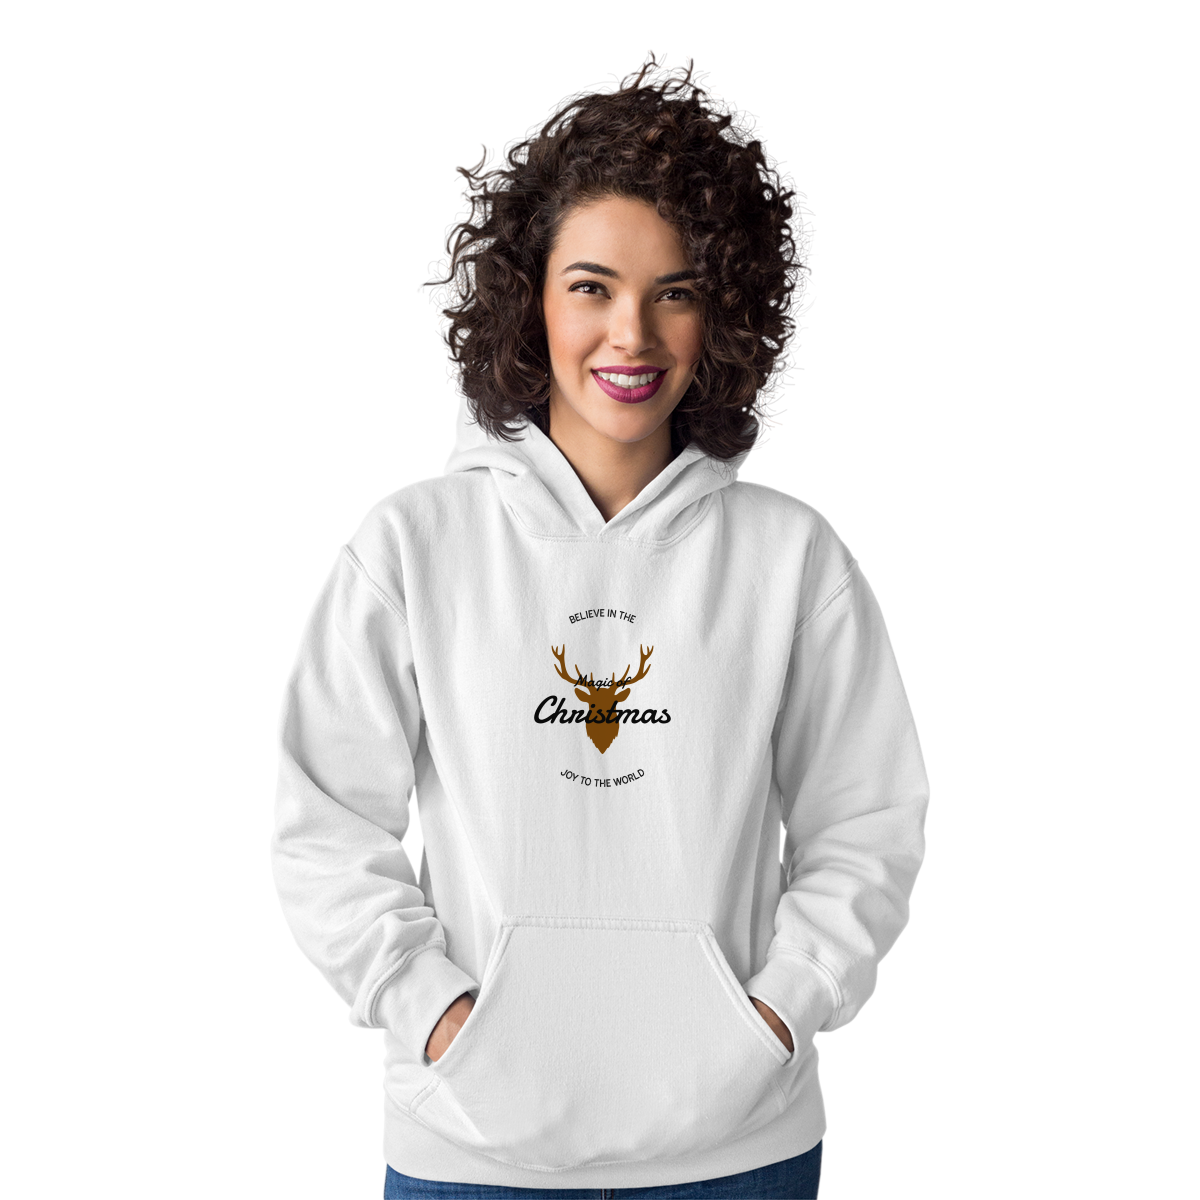 Believe in the Magic of Christmas Joy to the World Unisex Hoodie | White